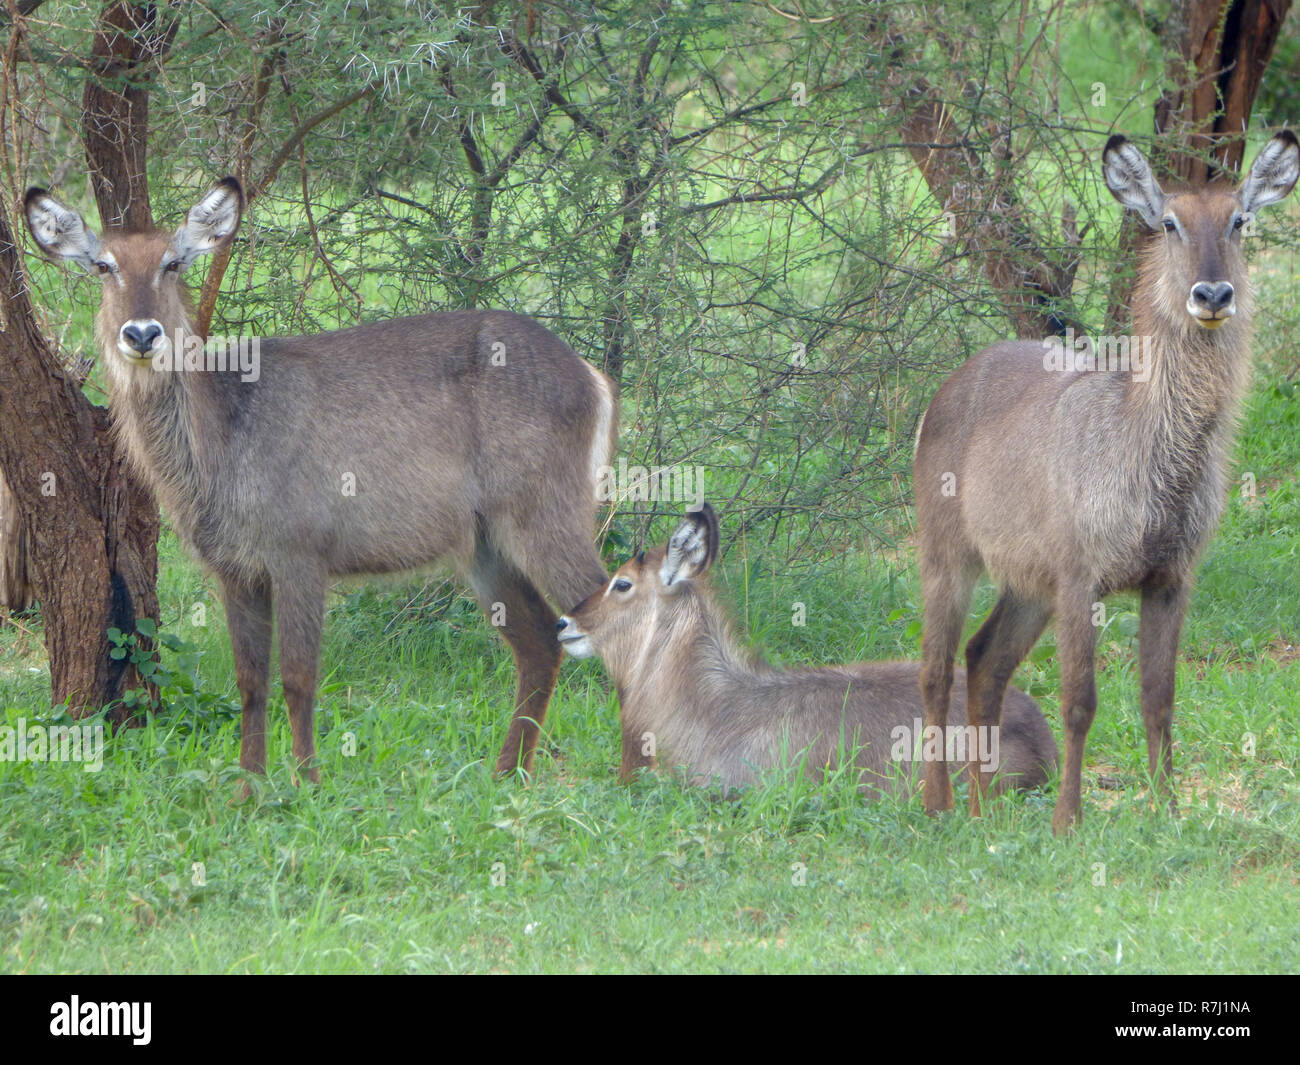 Female Ellipsen Waterbuck (Kobus ellipsiprymnus) Waterbucks are large antelopes that are found near to water in the grasslands and savannahs of southe Stock Photo